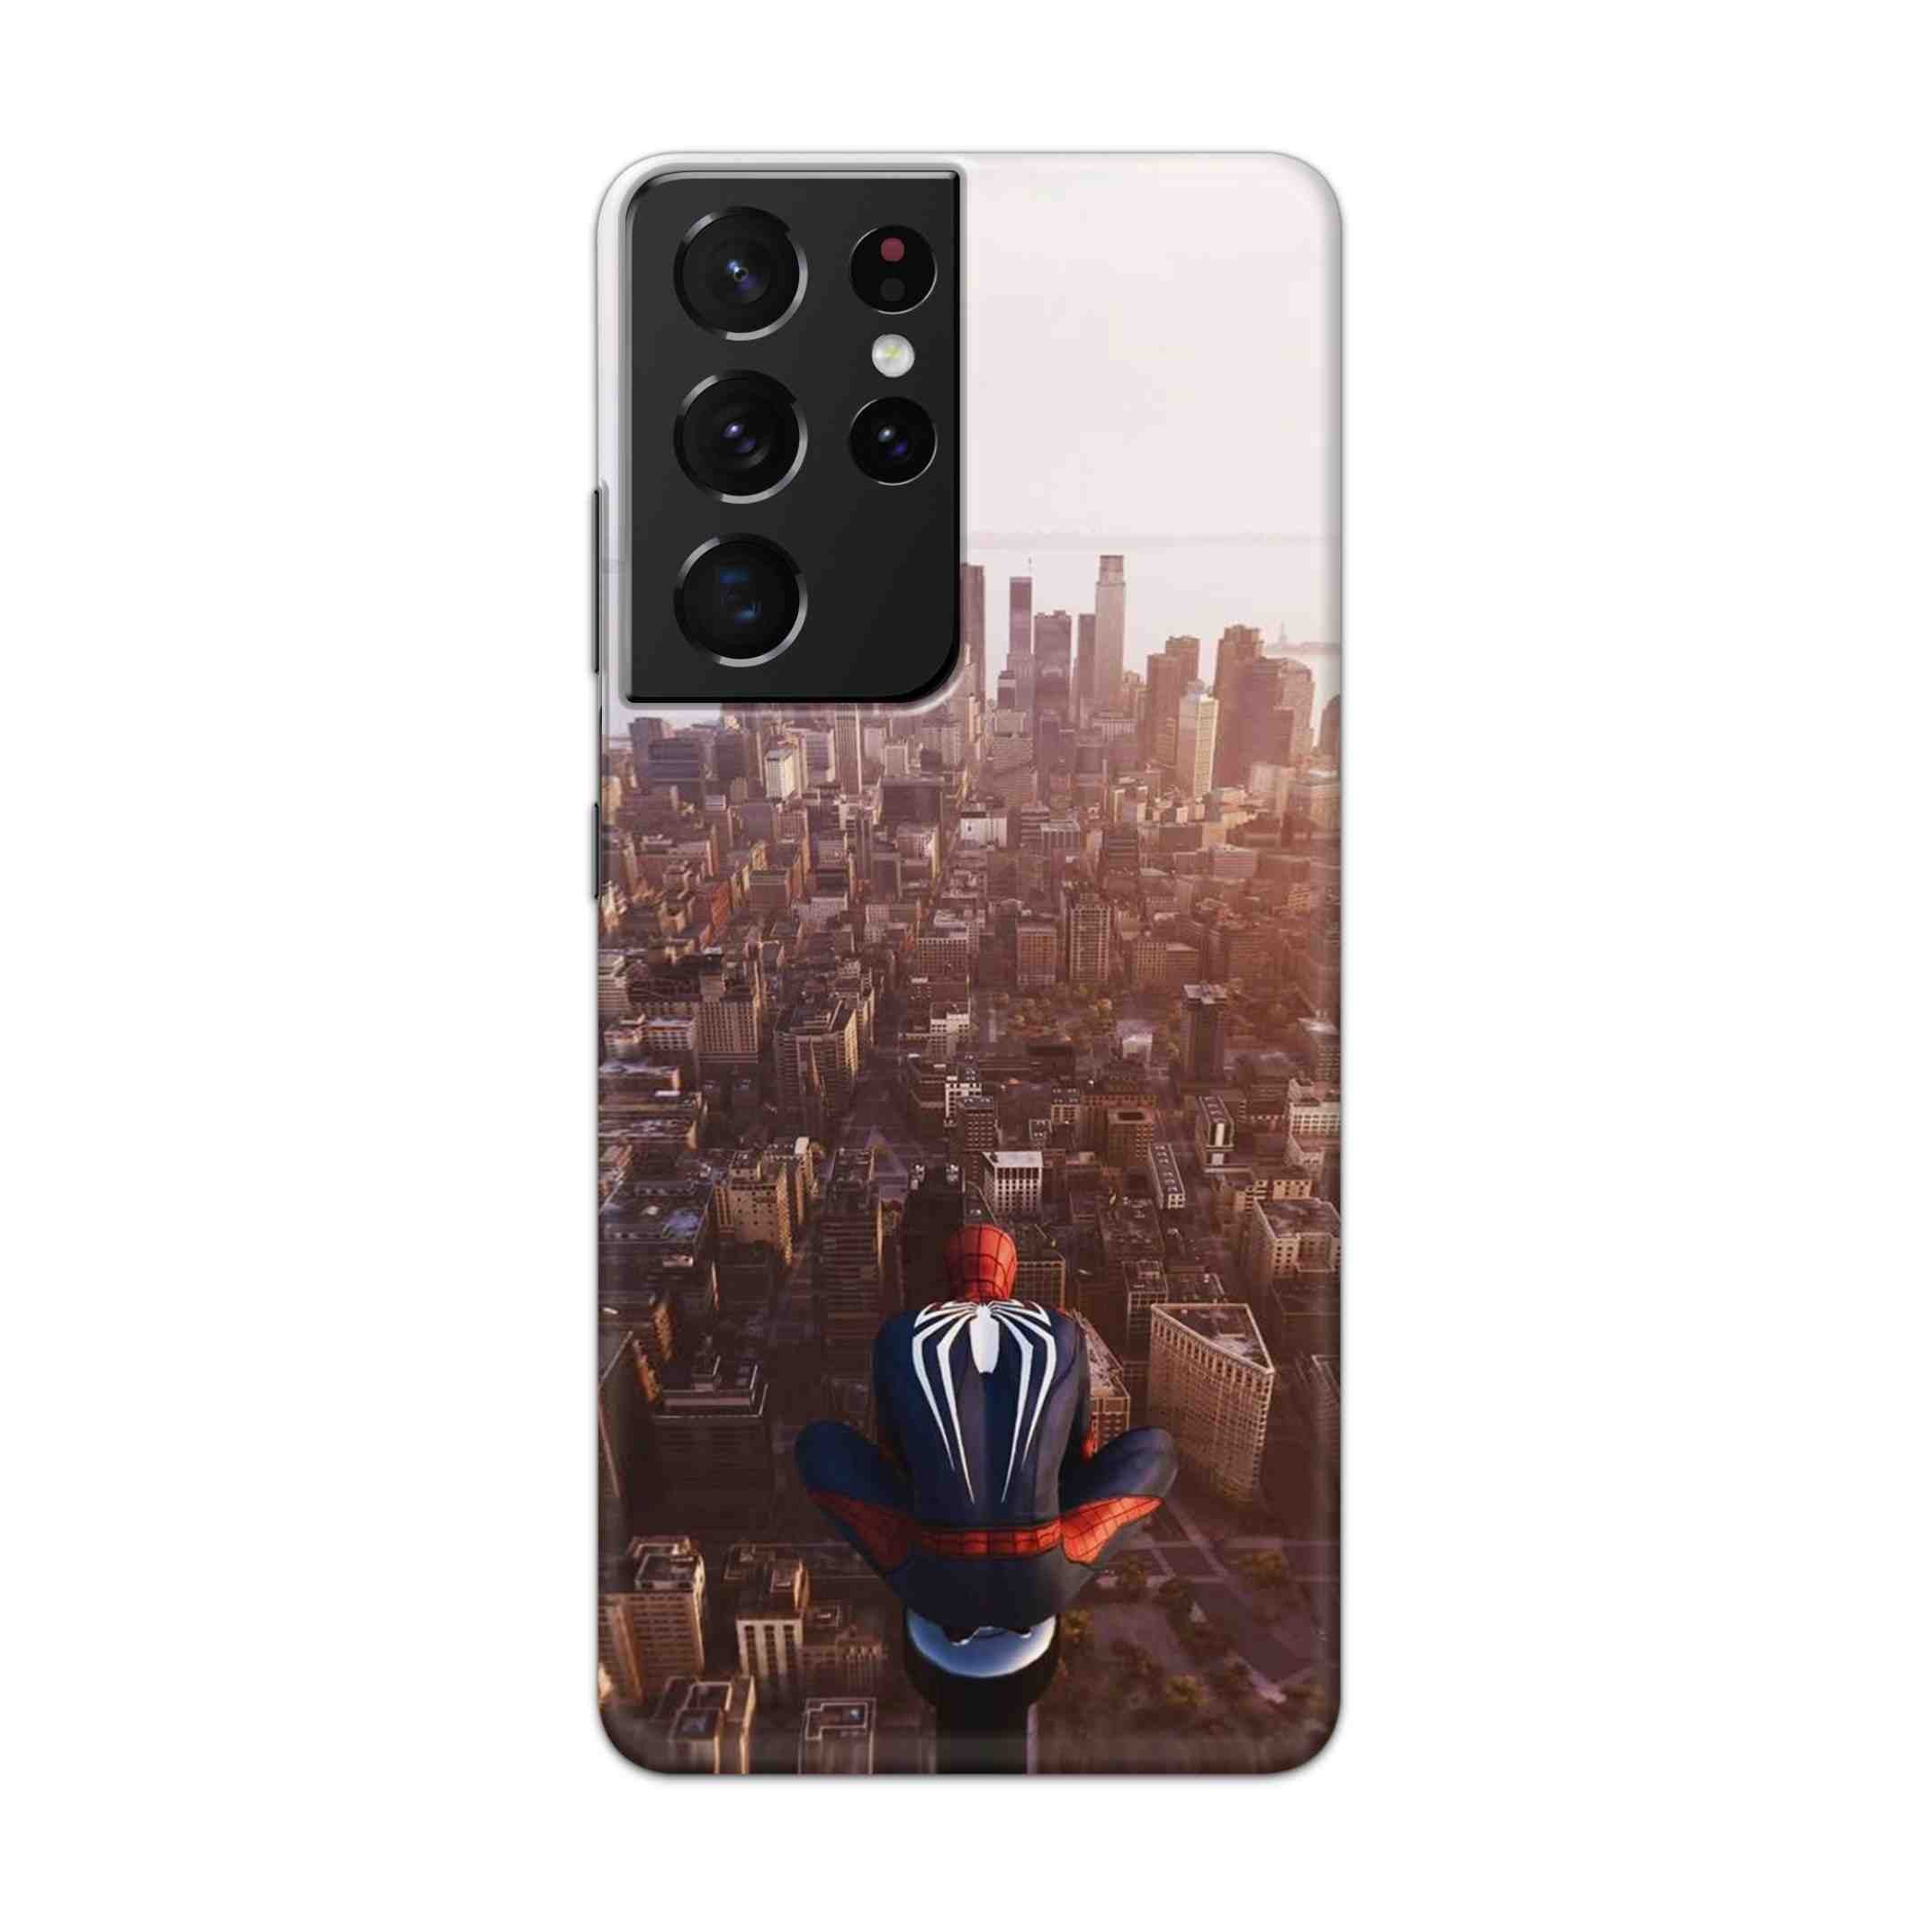 Buy City Of Spiderman Hard Back Mobile Phone Case Cover For Samsung Galaxy S21 Ultra Online